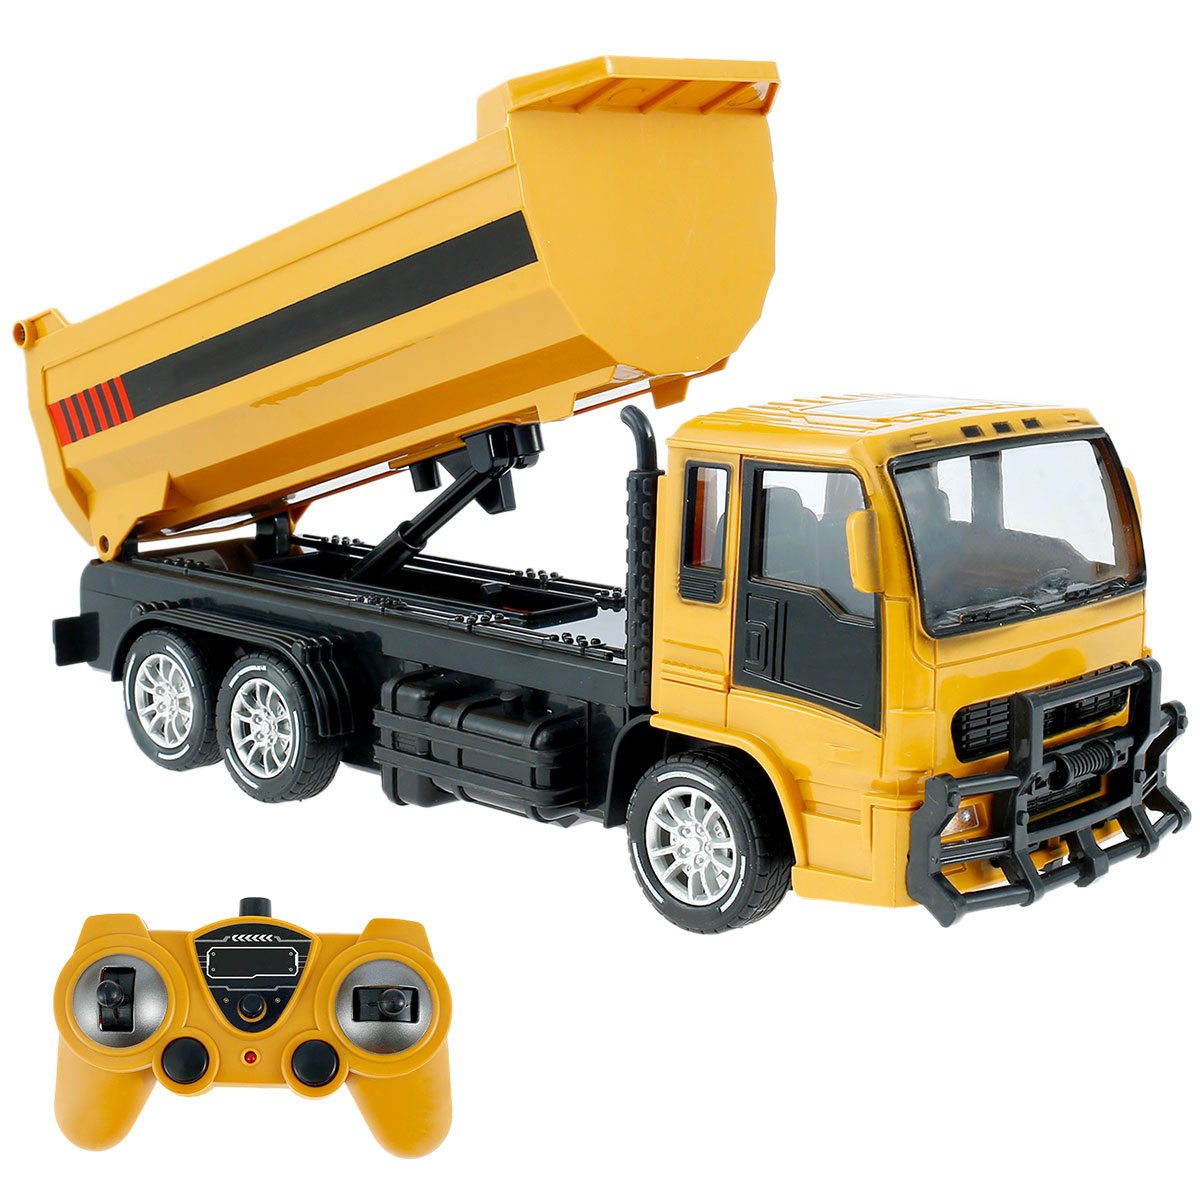 Remote Control Excavator Truck RC Construction Toys RC Dump Truck Digger Construction Vehicle Toy with LED Lights USB Electric RC Remote Control Construction Tractor Gifts for Kids - image 1 of 7